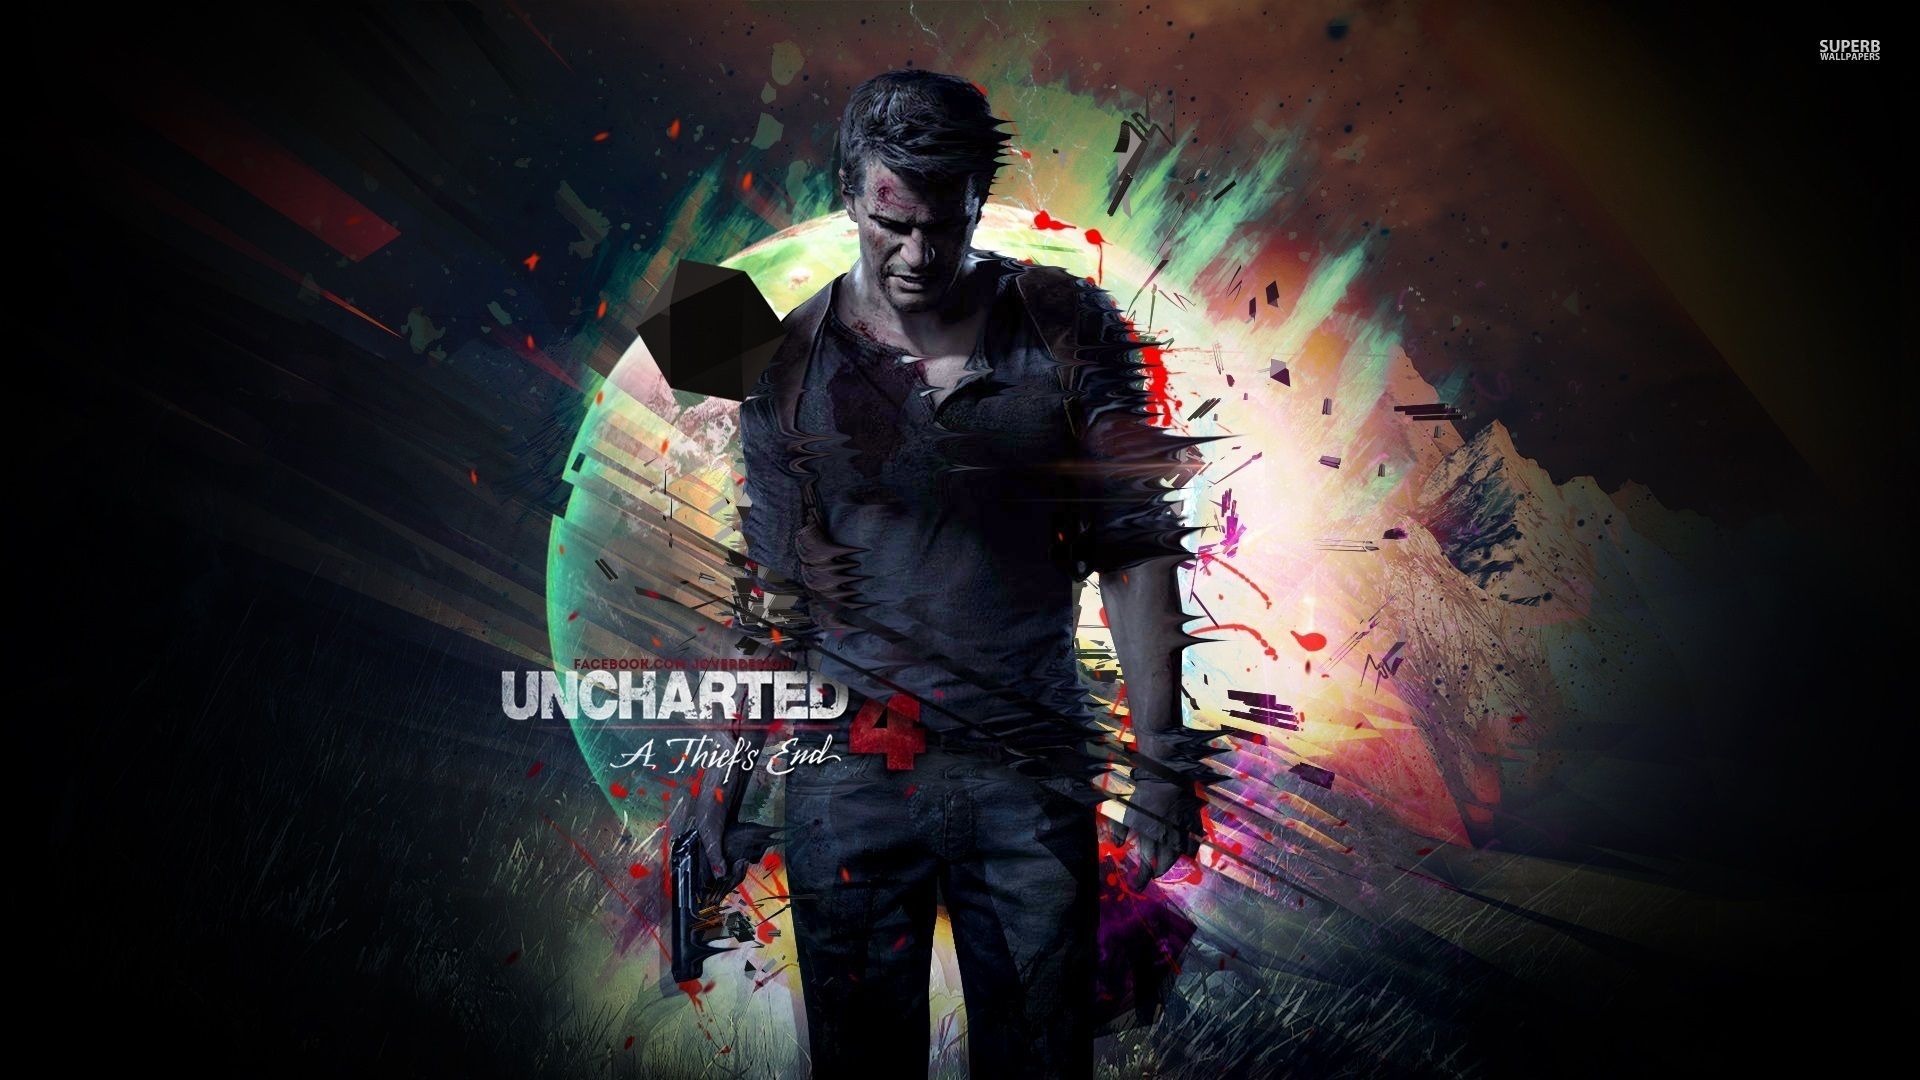 Uncharted 4: A Thief's End wallpaper - Game wallpapers - #31488